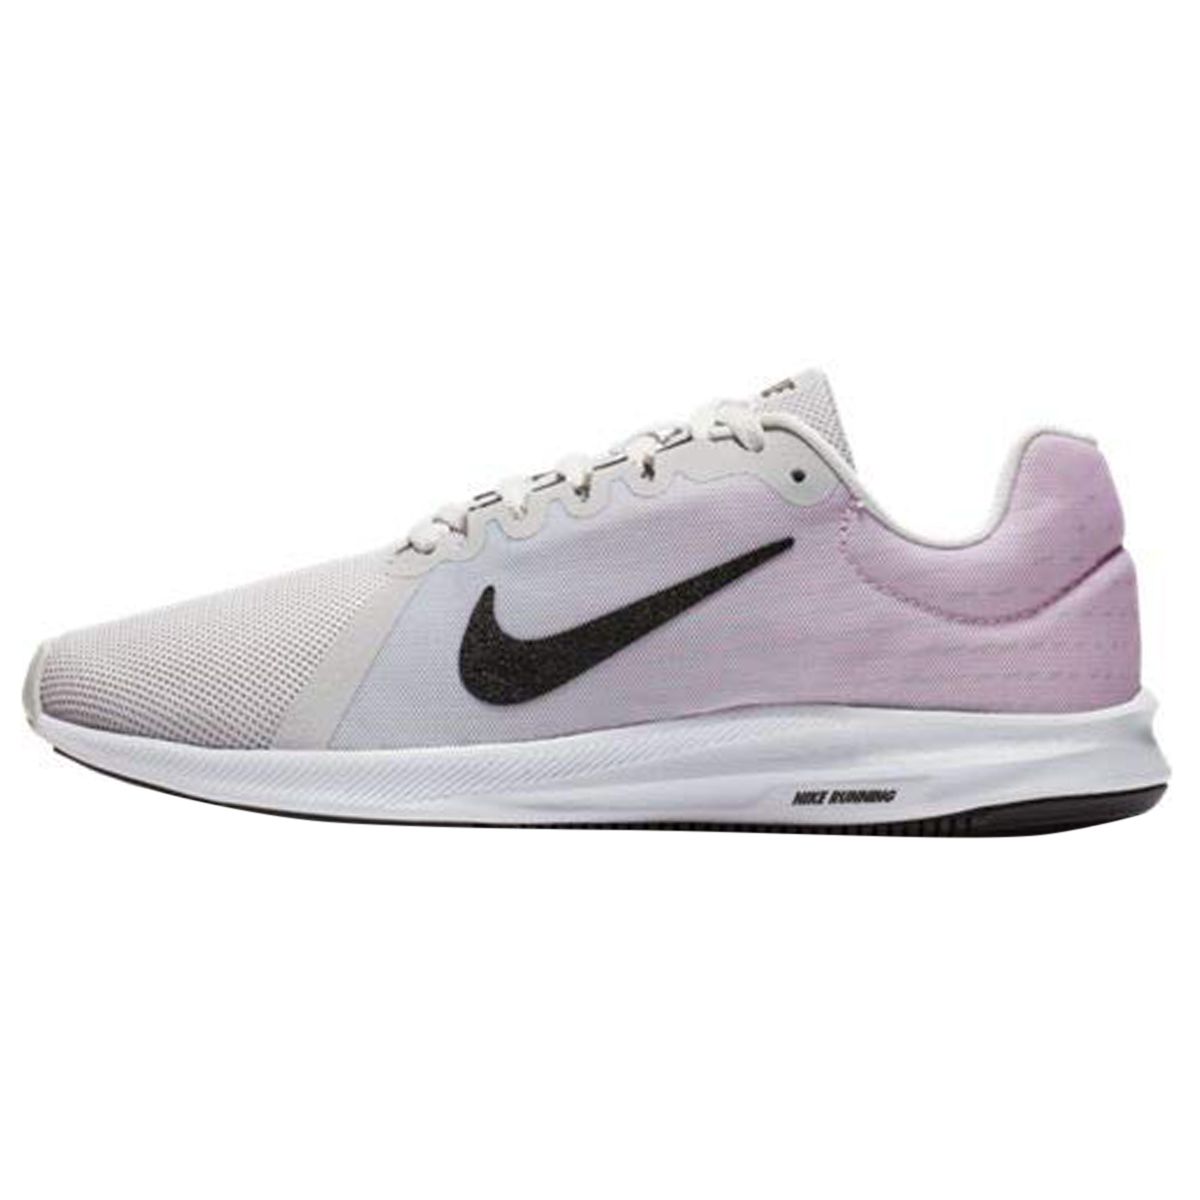 Nike Downshifter 8 Womens Style 